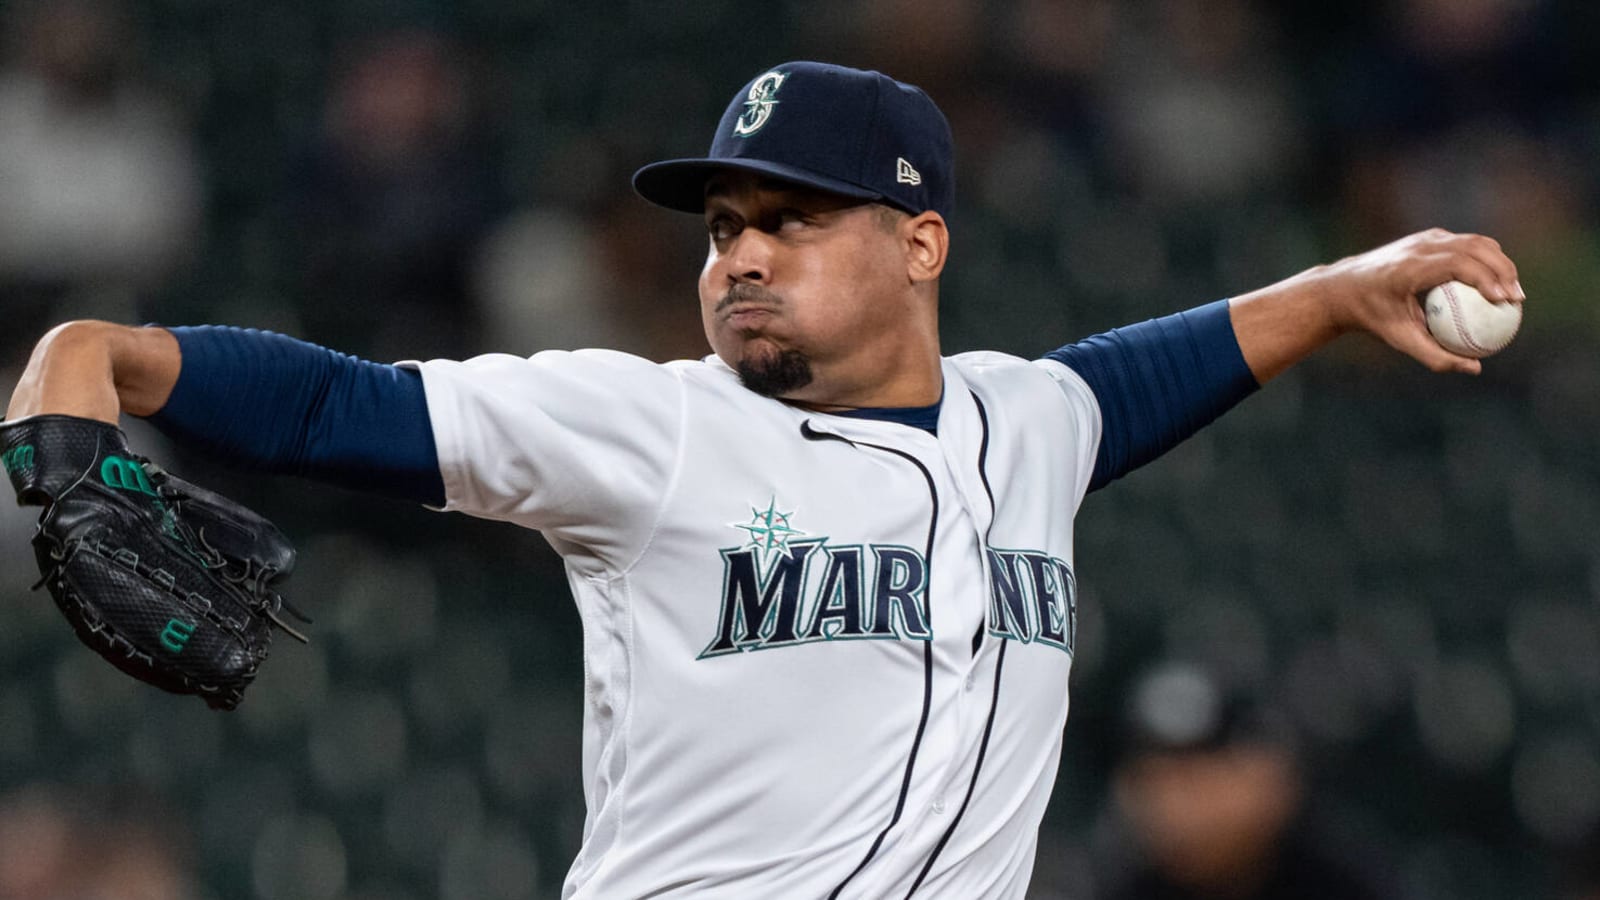 Mariners release former first-round pick Justus Sheffield